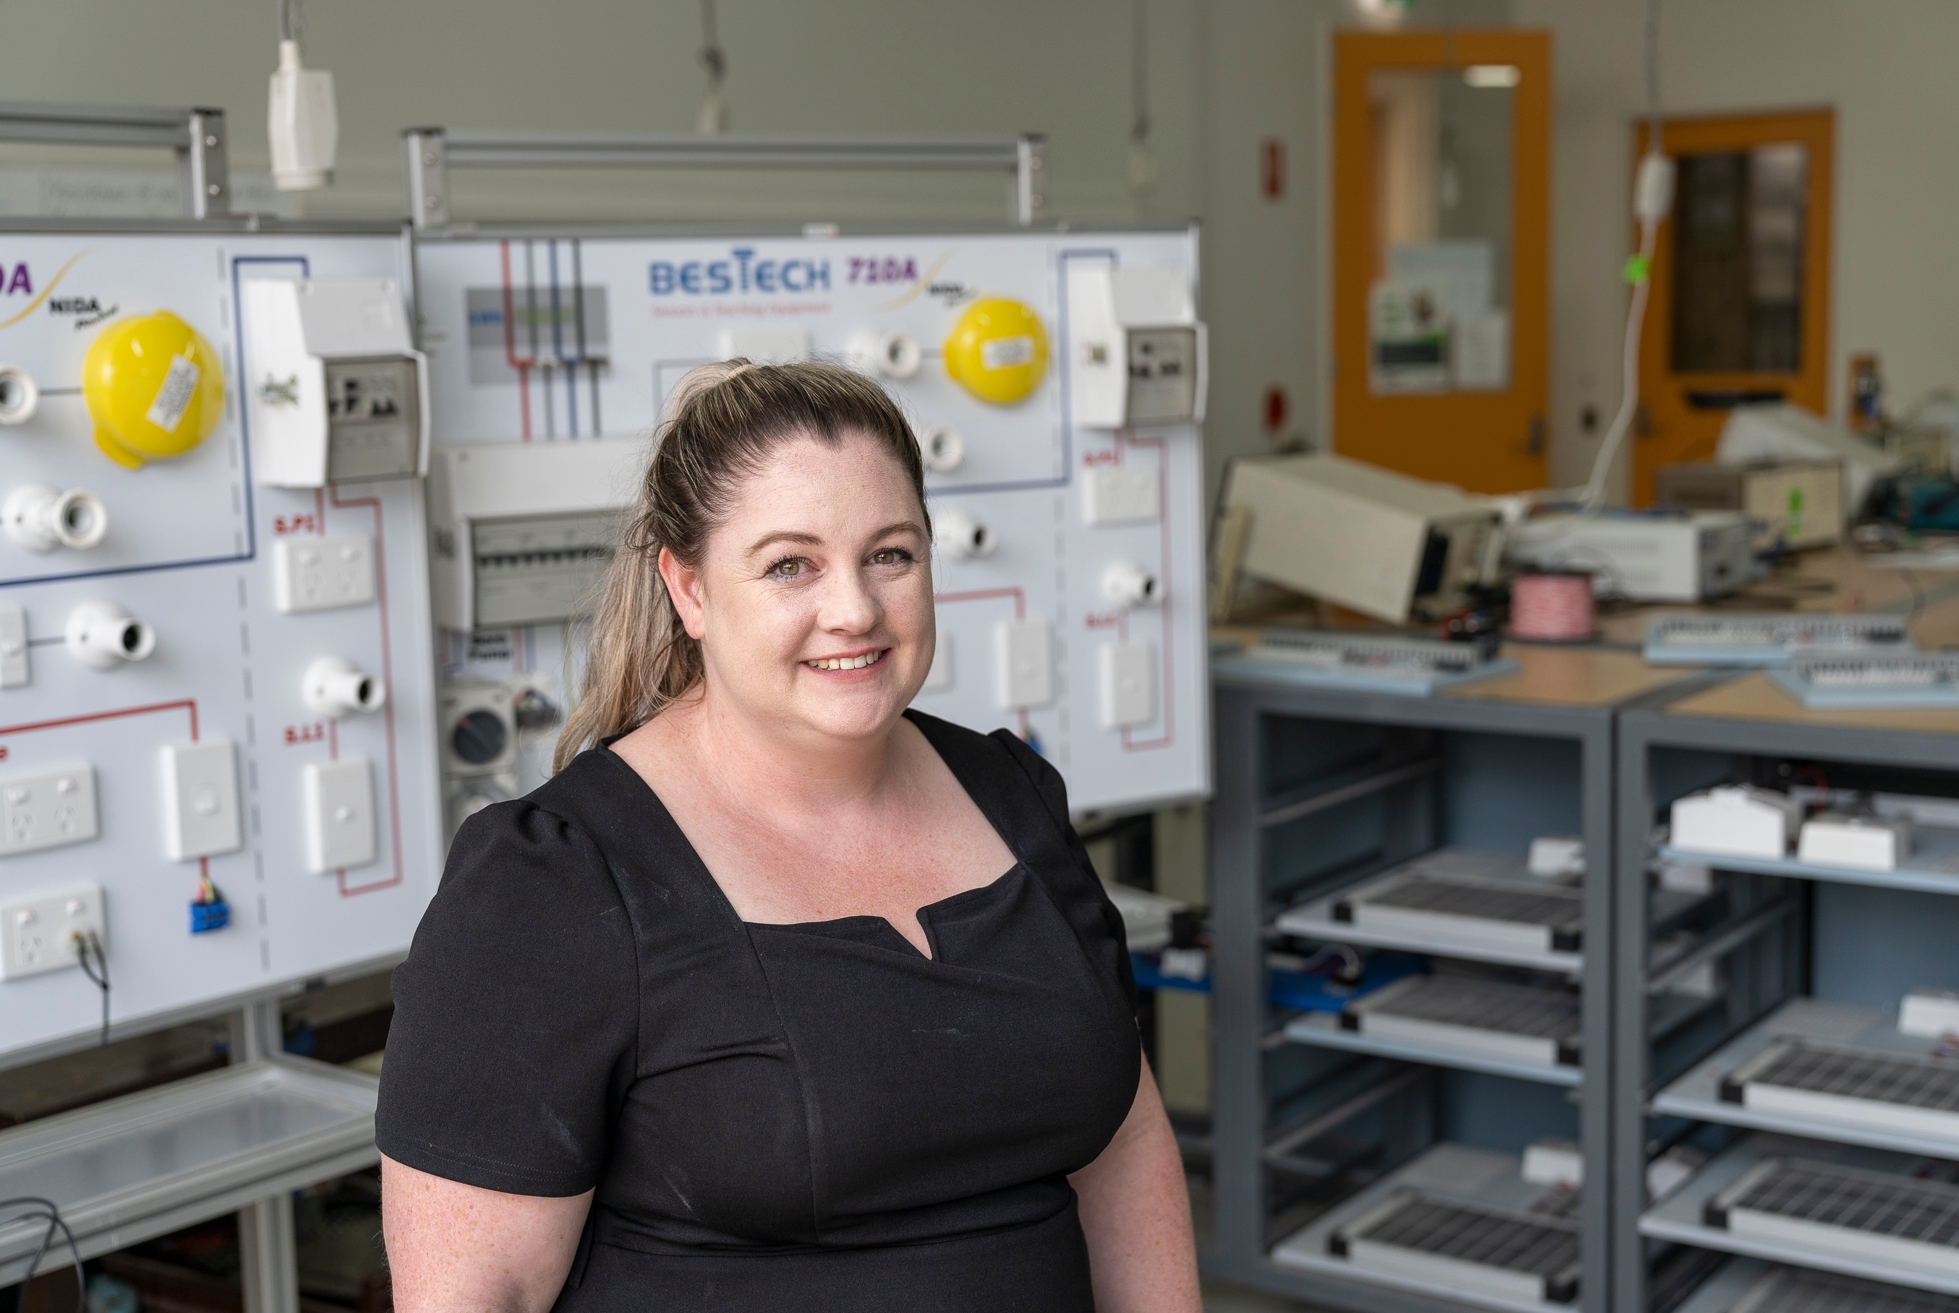 Female electrician returns to TAFE to train next generation of electricians